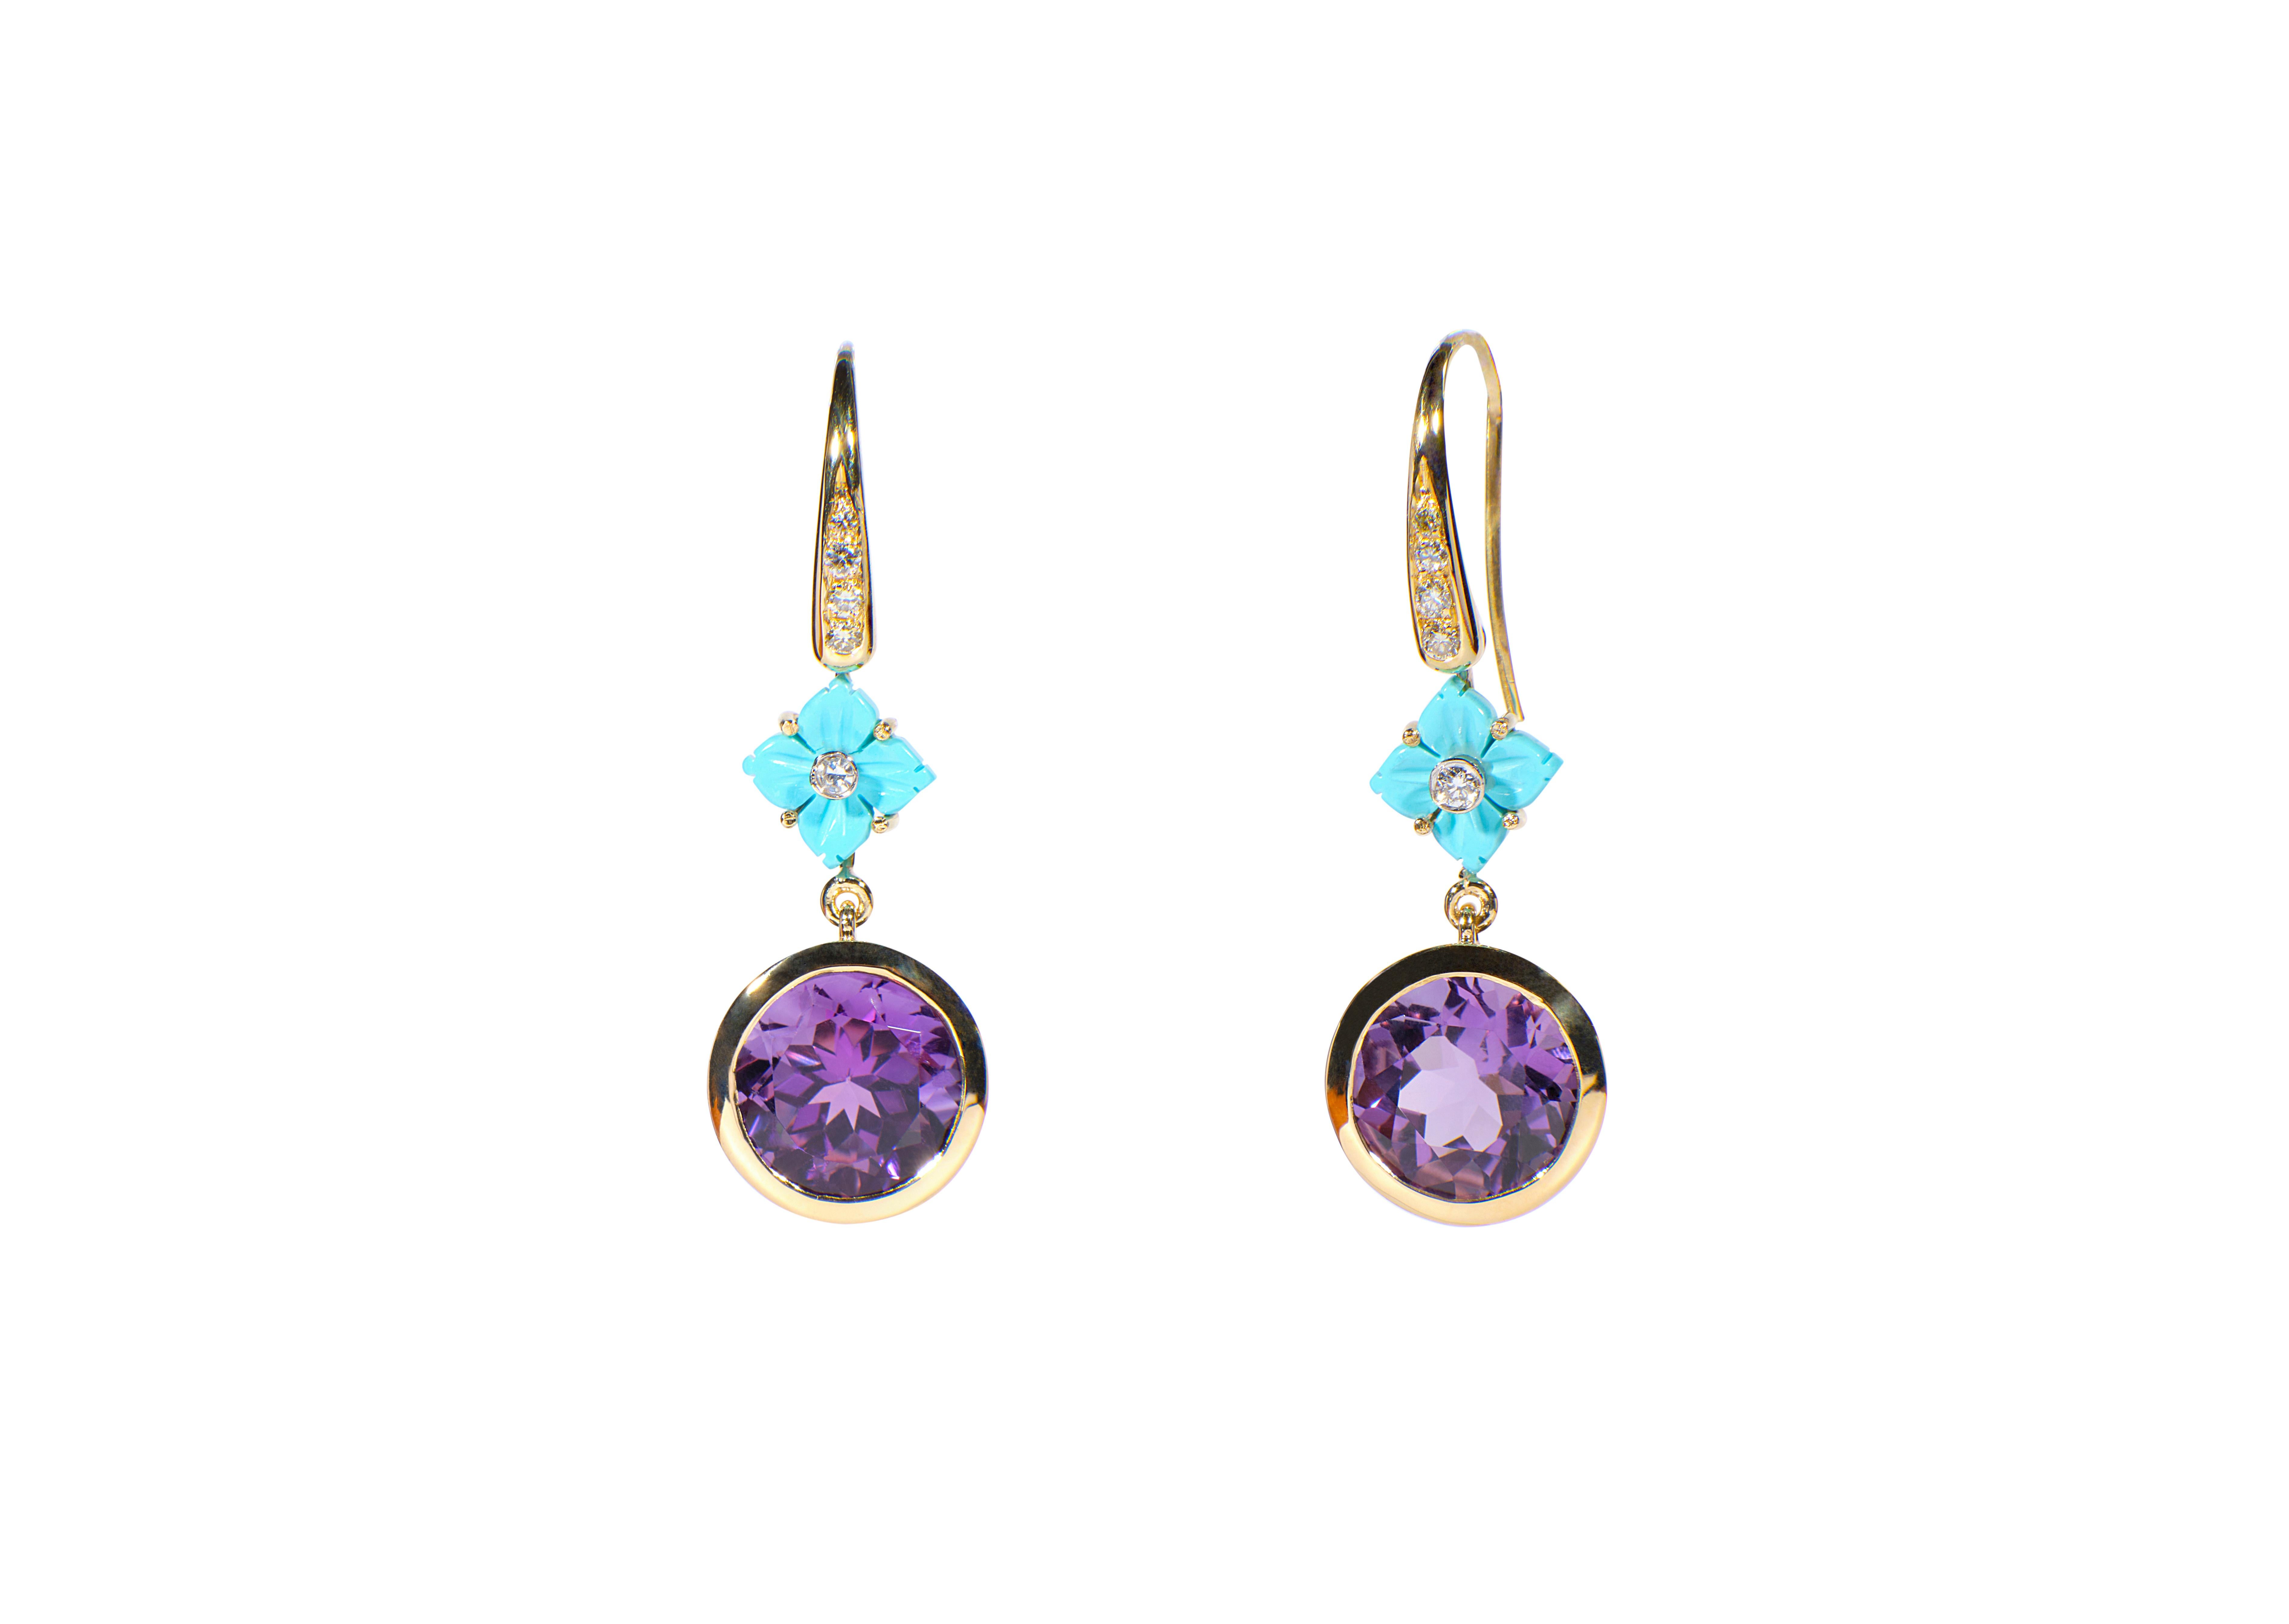 Unique 18k Gold Earrings Turquoise Flower Amethyst Diamonds Handcrafted in Italy In New Condition For Sale In Rome, IT